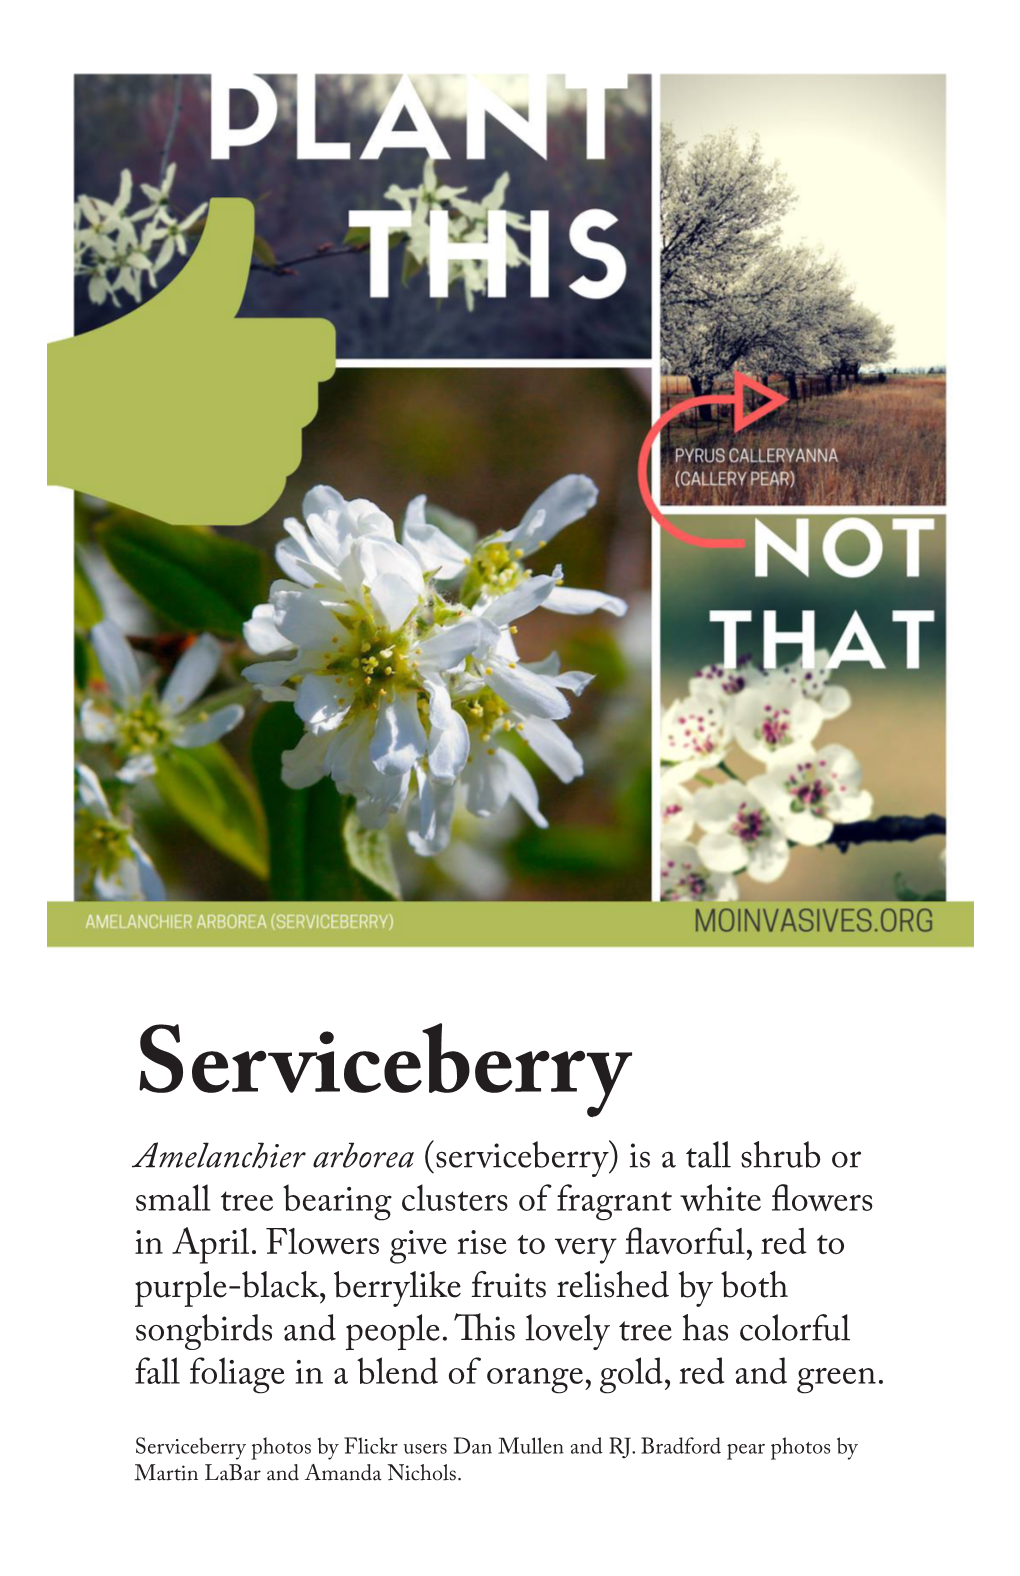 Amelanchier Arborea (Serviceberry) Is a Tall Shrub Or Small Tree Bearing Clusters of Fragrant White Owers in April